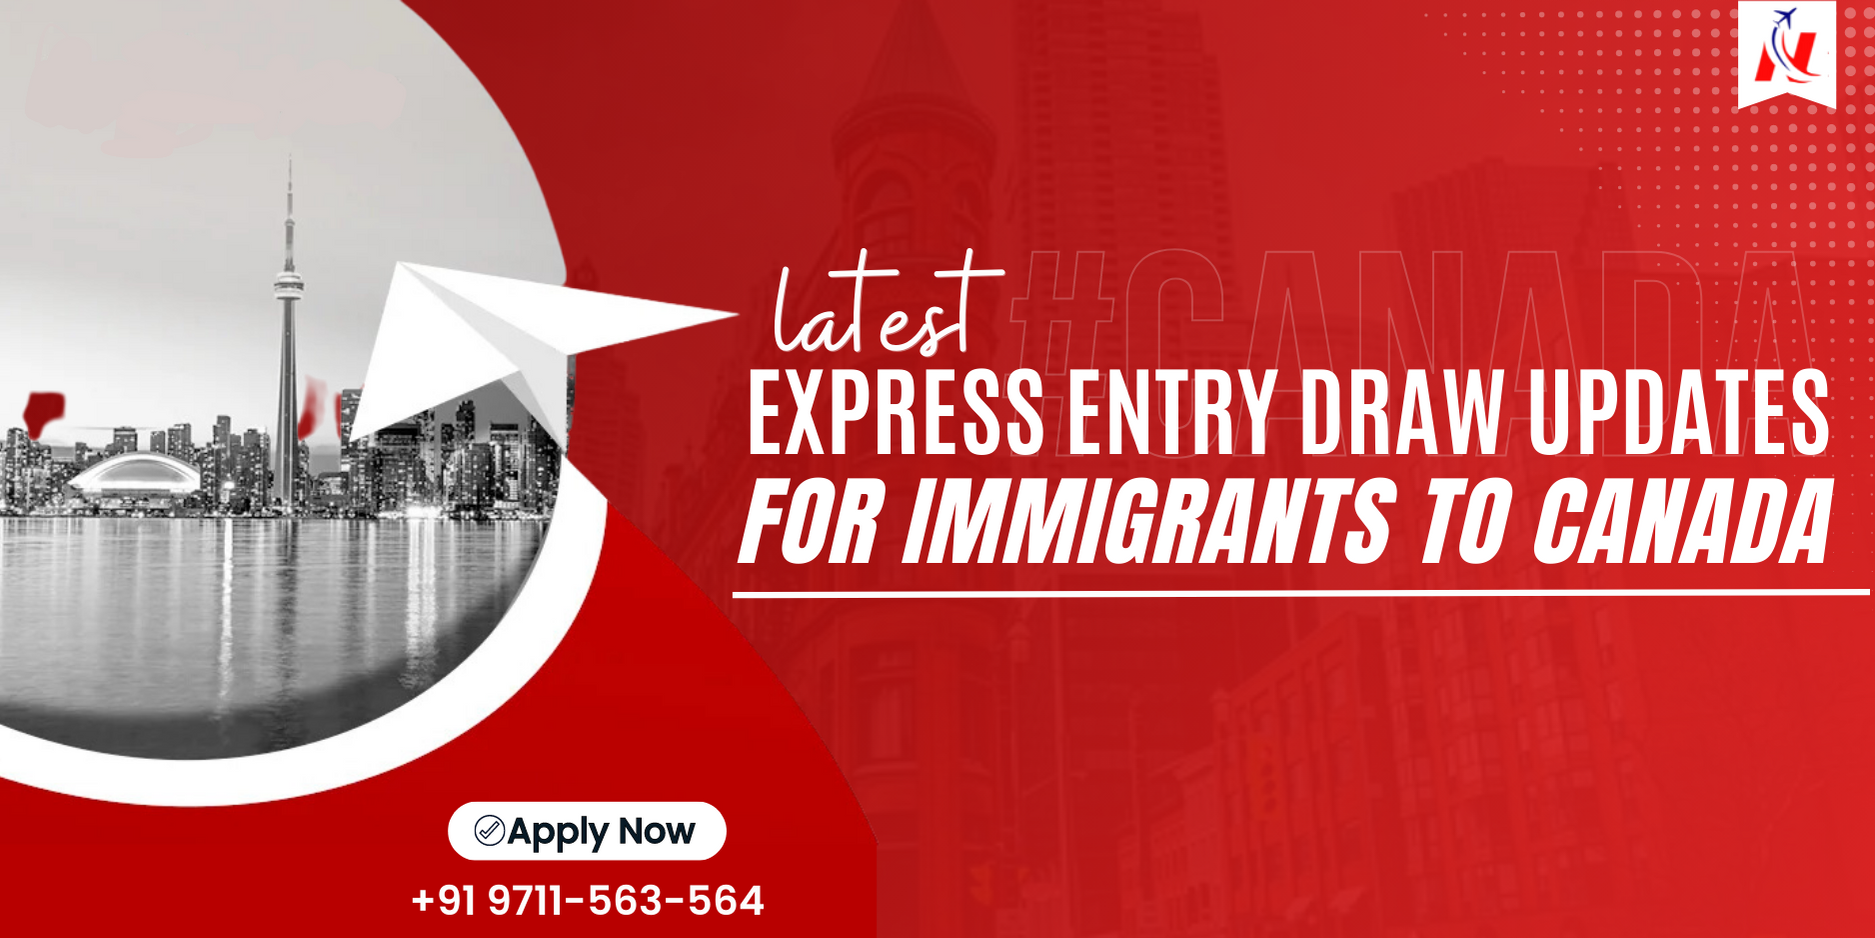 Latest Express Entry Draw updates for immigrants to Canada